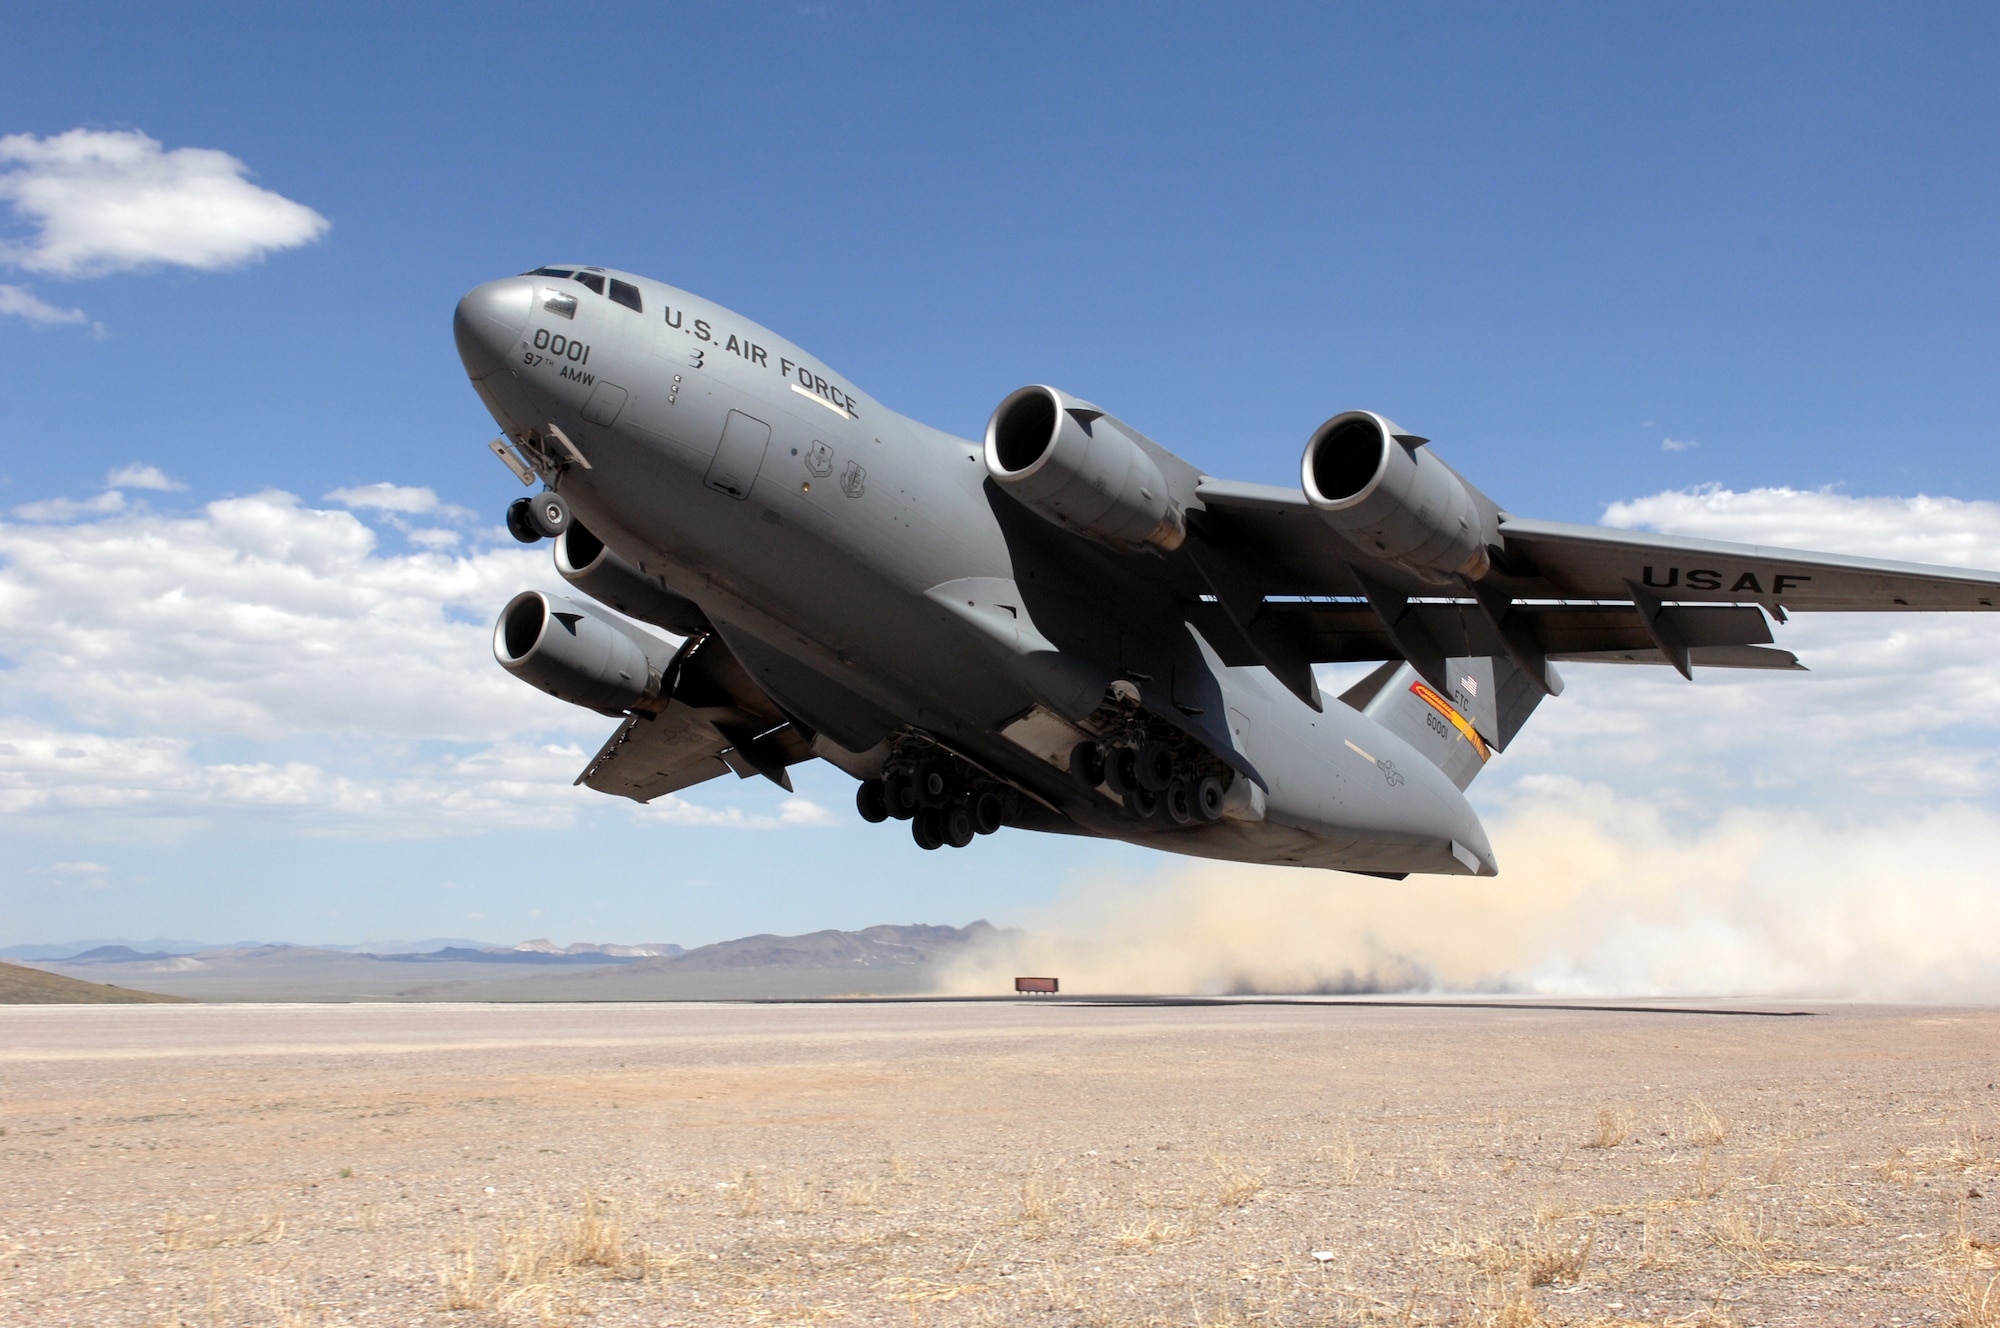 A C-17 Globemaster III assigned to the 97th Air Mobility Wing at Altus Air Force Base, Okla., takes off from the Tonopah runway May 20 near Nellis AFB, Nev., while participating in the Mobility Air Forces Exercise.  Approximately 12 U.S. Air Force bases participate in the exercise twice a year, testing the crew ability of C-17 Globemaster IIIs and C-130s to join together in formation at a specific time and location to drop a brigade-size force anywhere in the world. (U.S. Air Force photo/Airman 1st Class Brett Clashman)

